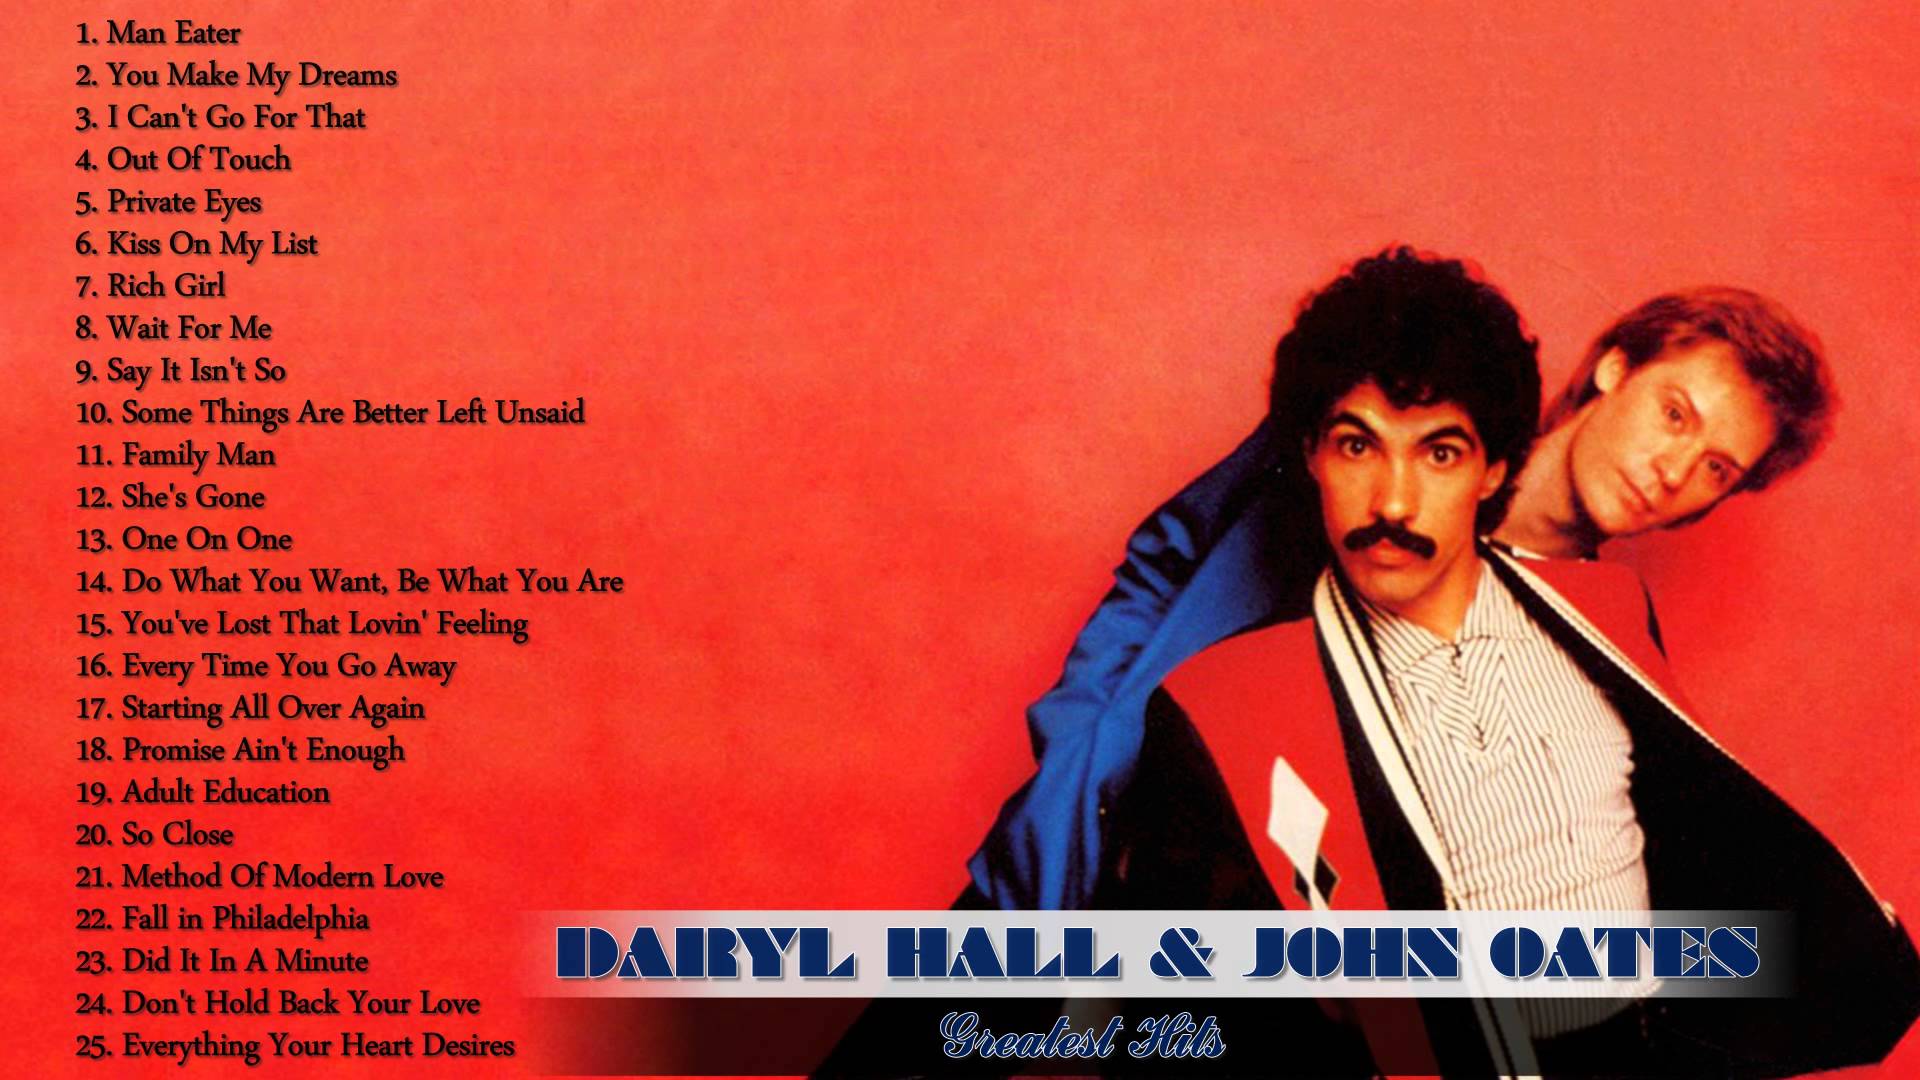 THE BEST OF DARYL HALL & JOHN OATES Trailers, Photo and Wallpaper